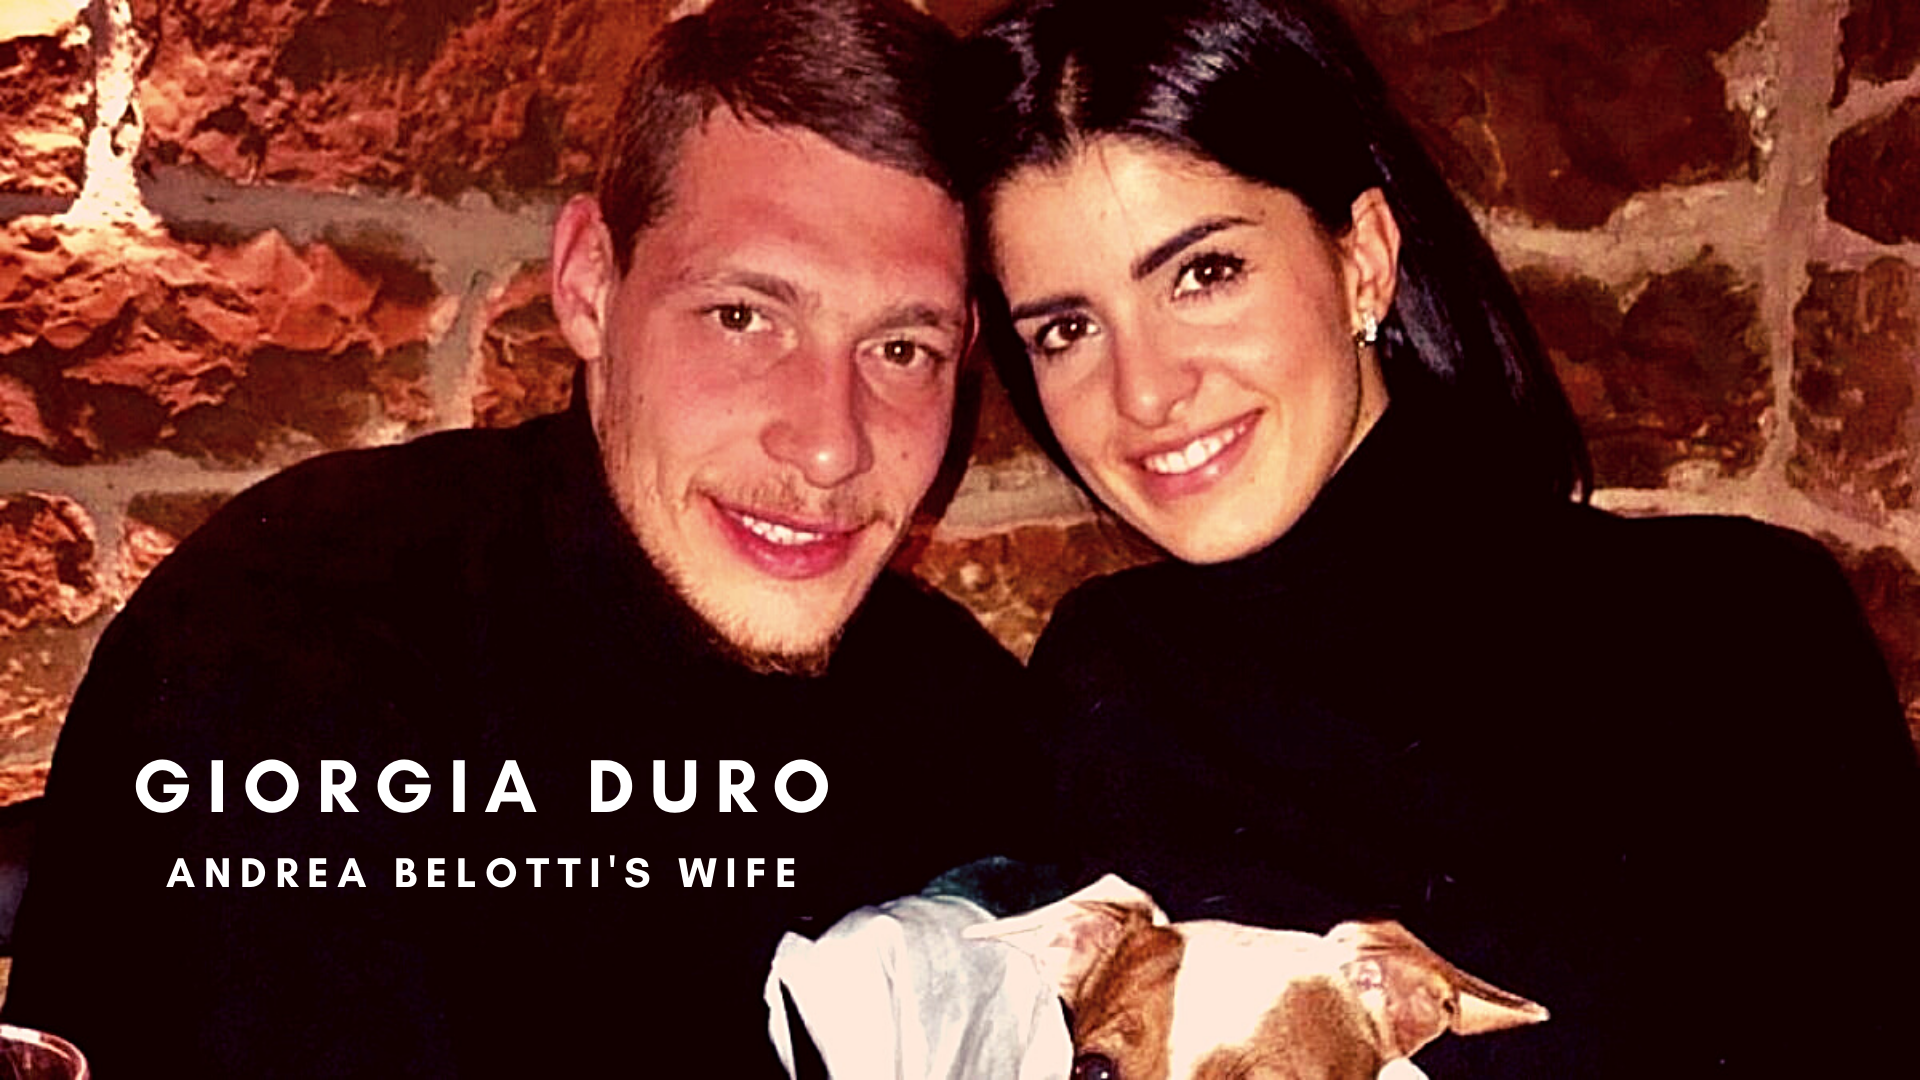 Who Is Giorgia Duro? Meet The Wife Of Andrea Belotti Wife